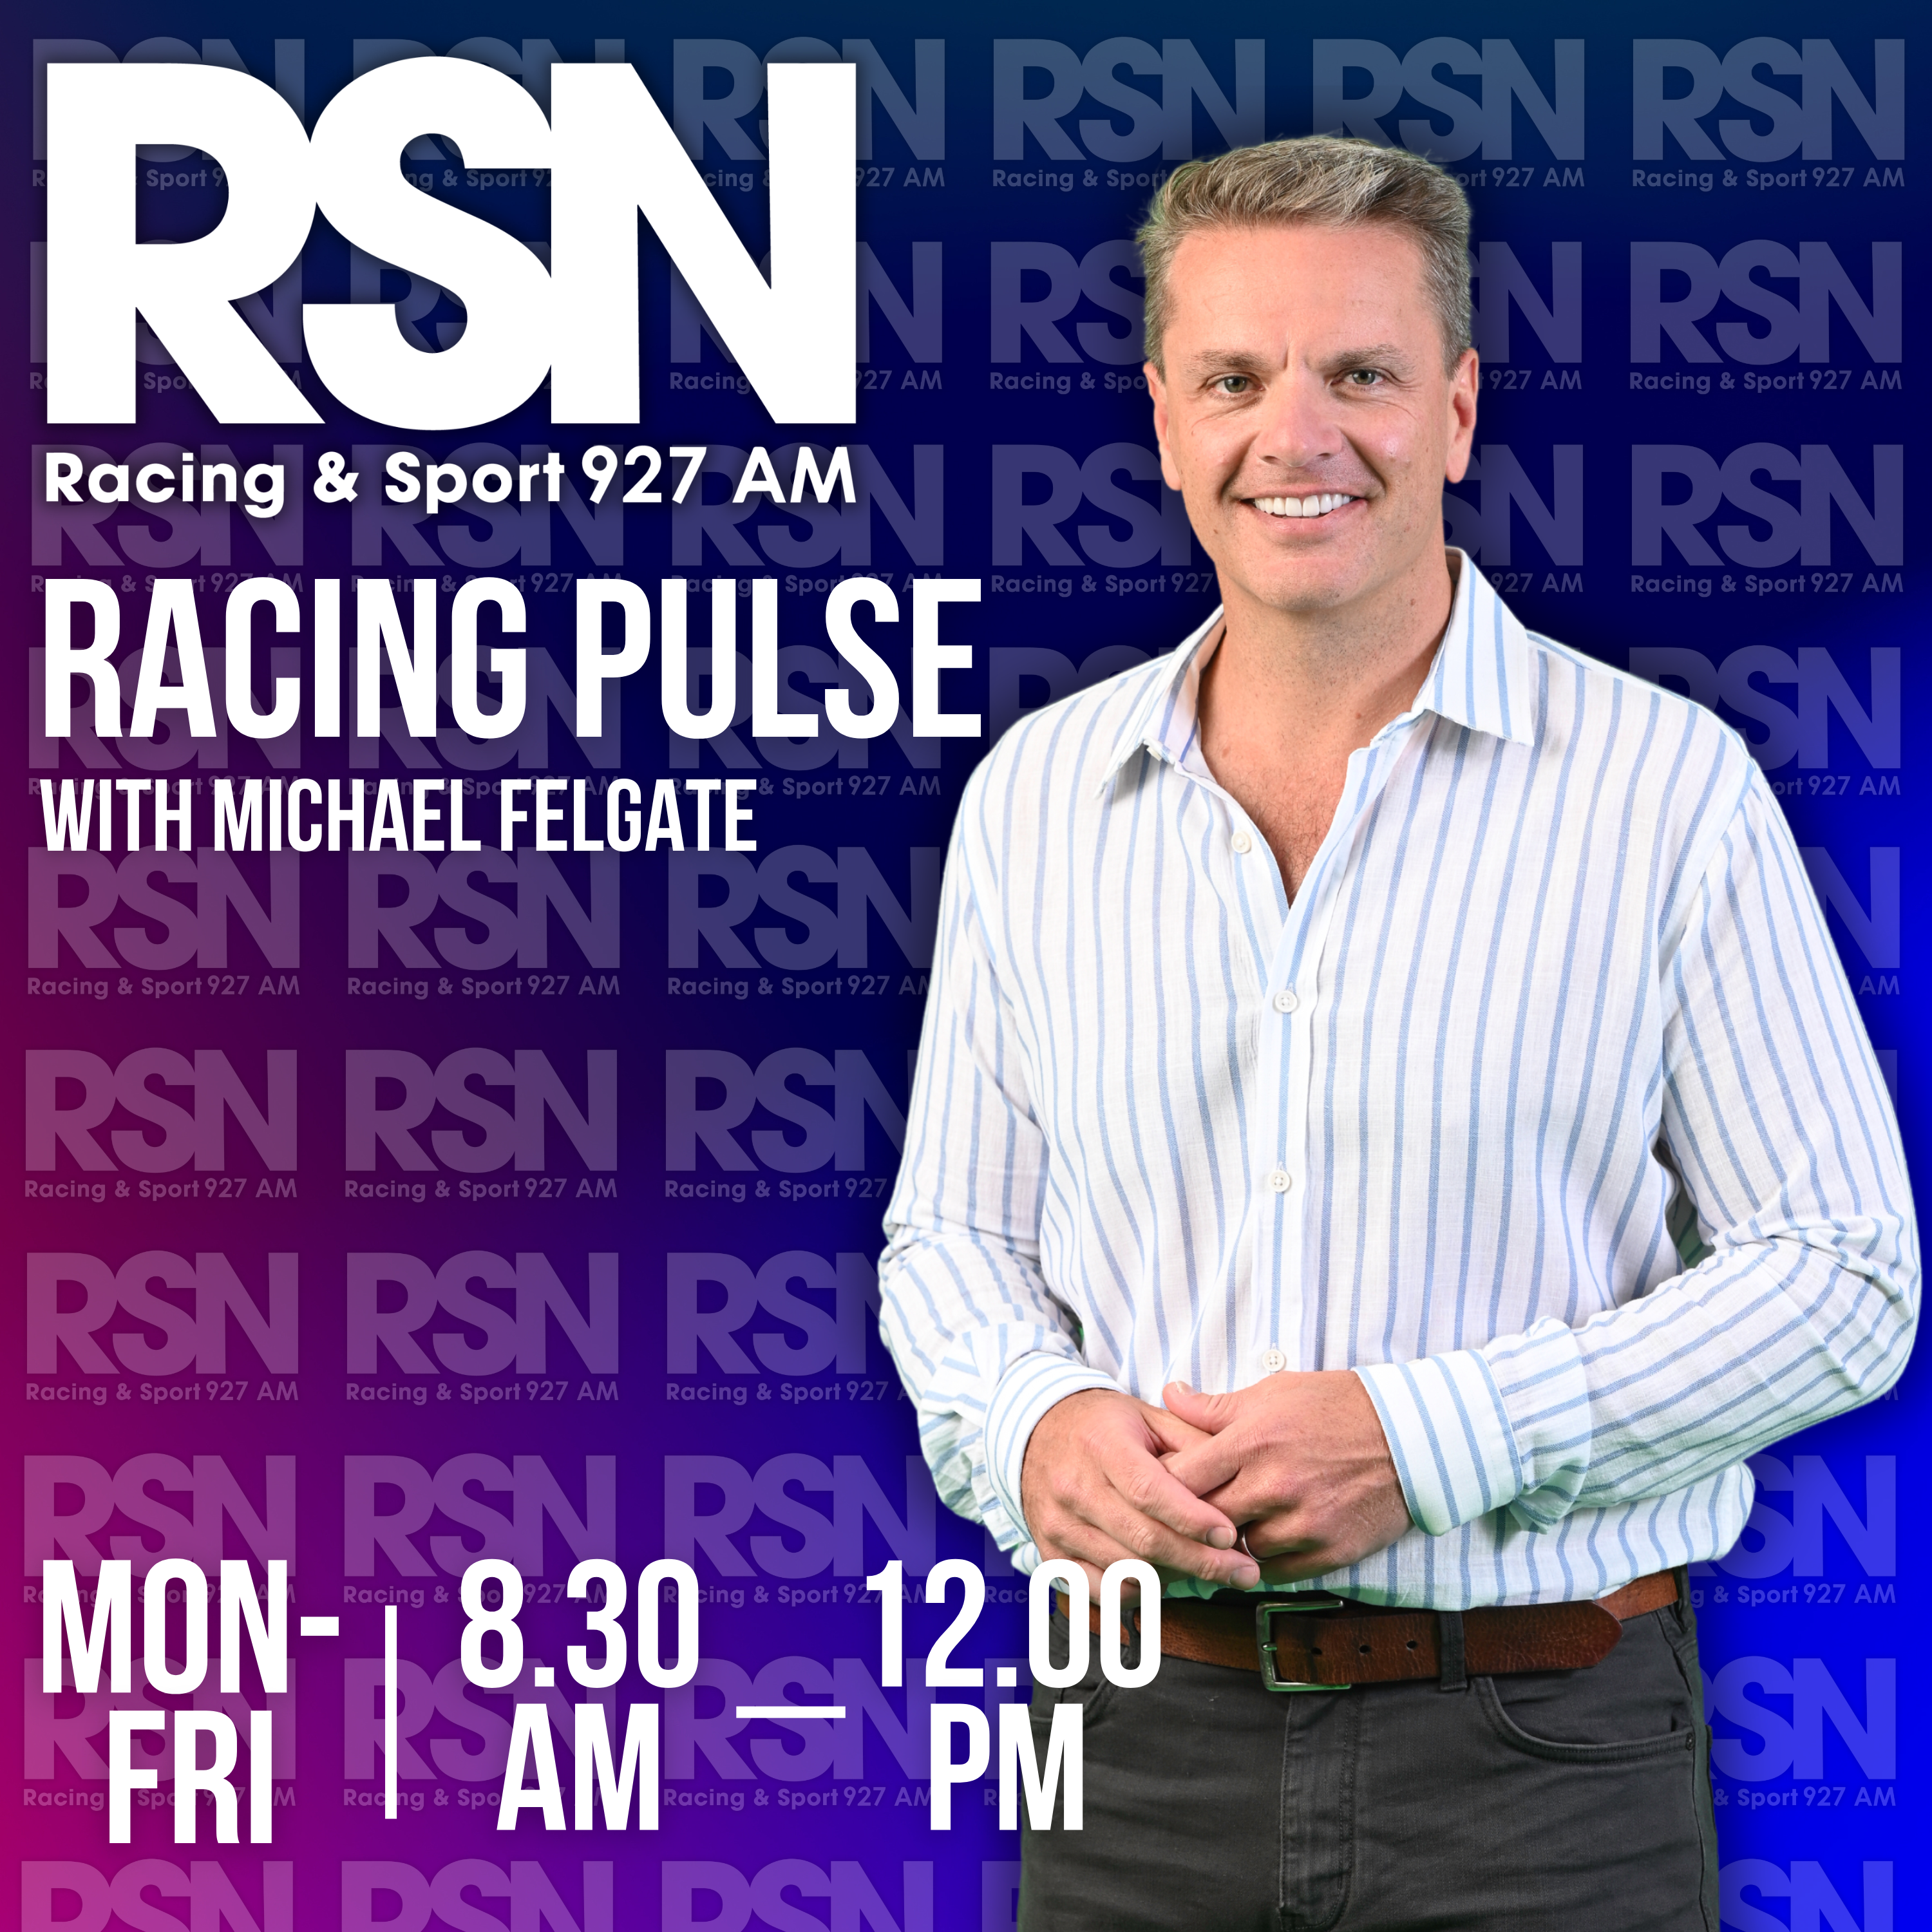 Tony Gollan with the latest on his Eagle Farm team this weekend